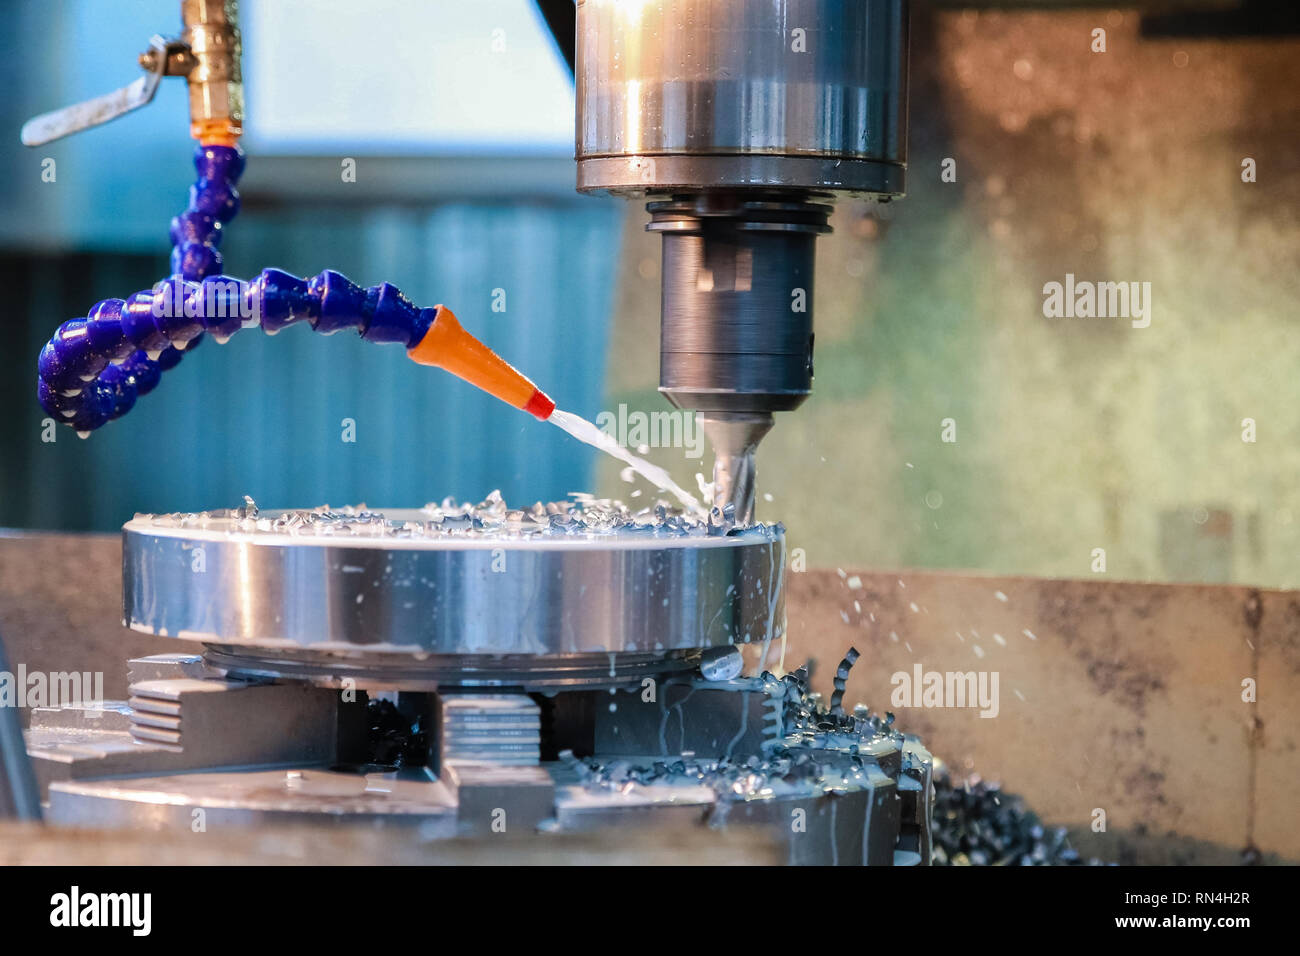 Drilling machine makes a hole in the metal product. Coolant is pouring on the drill. Stock Photo